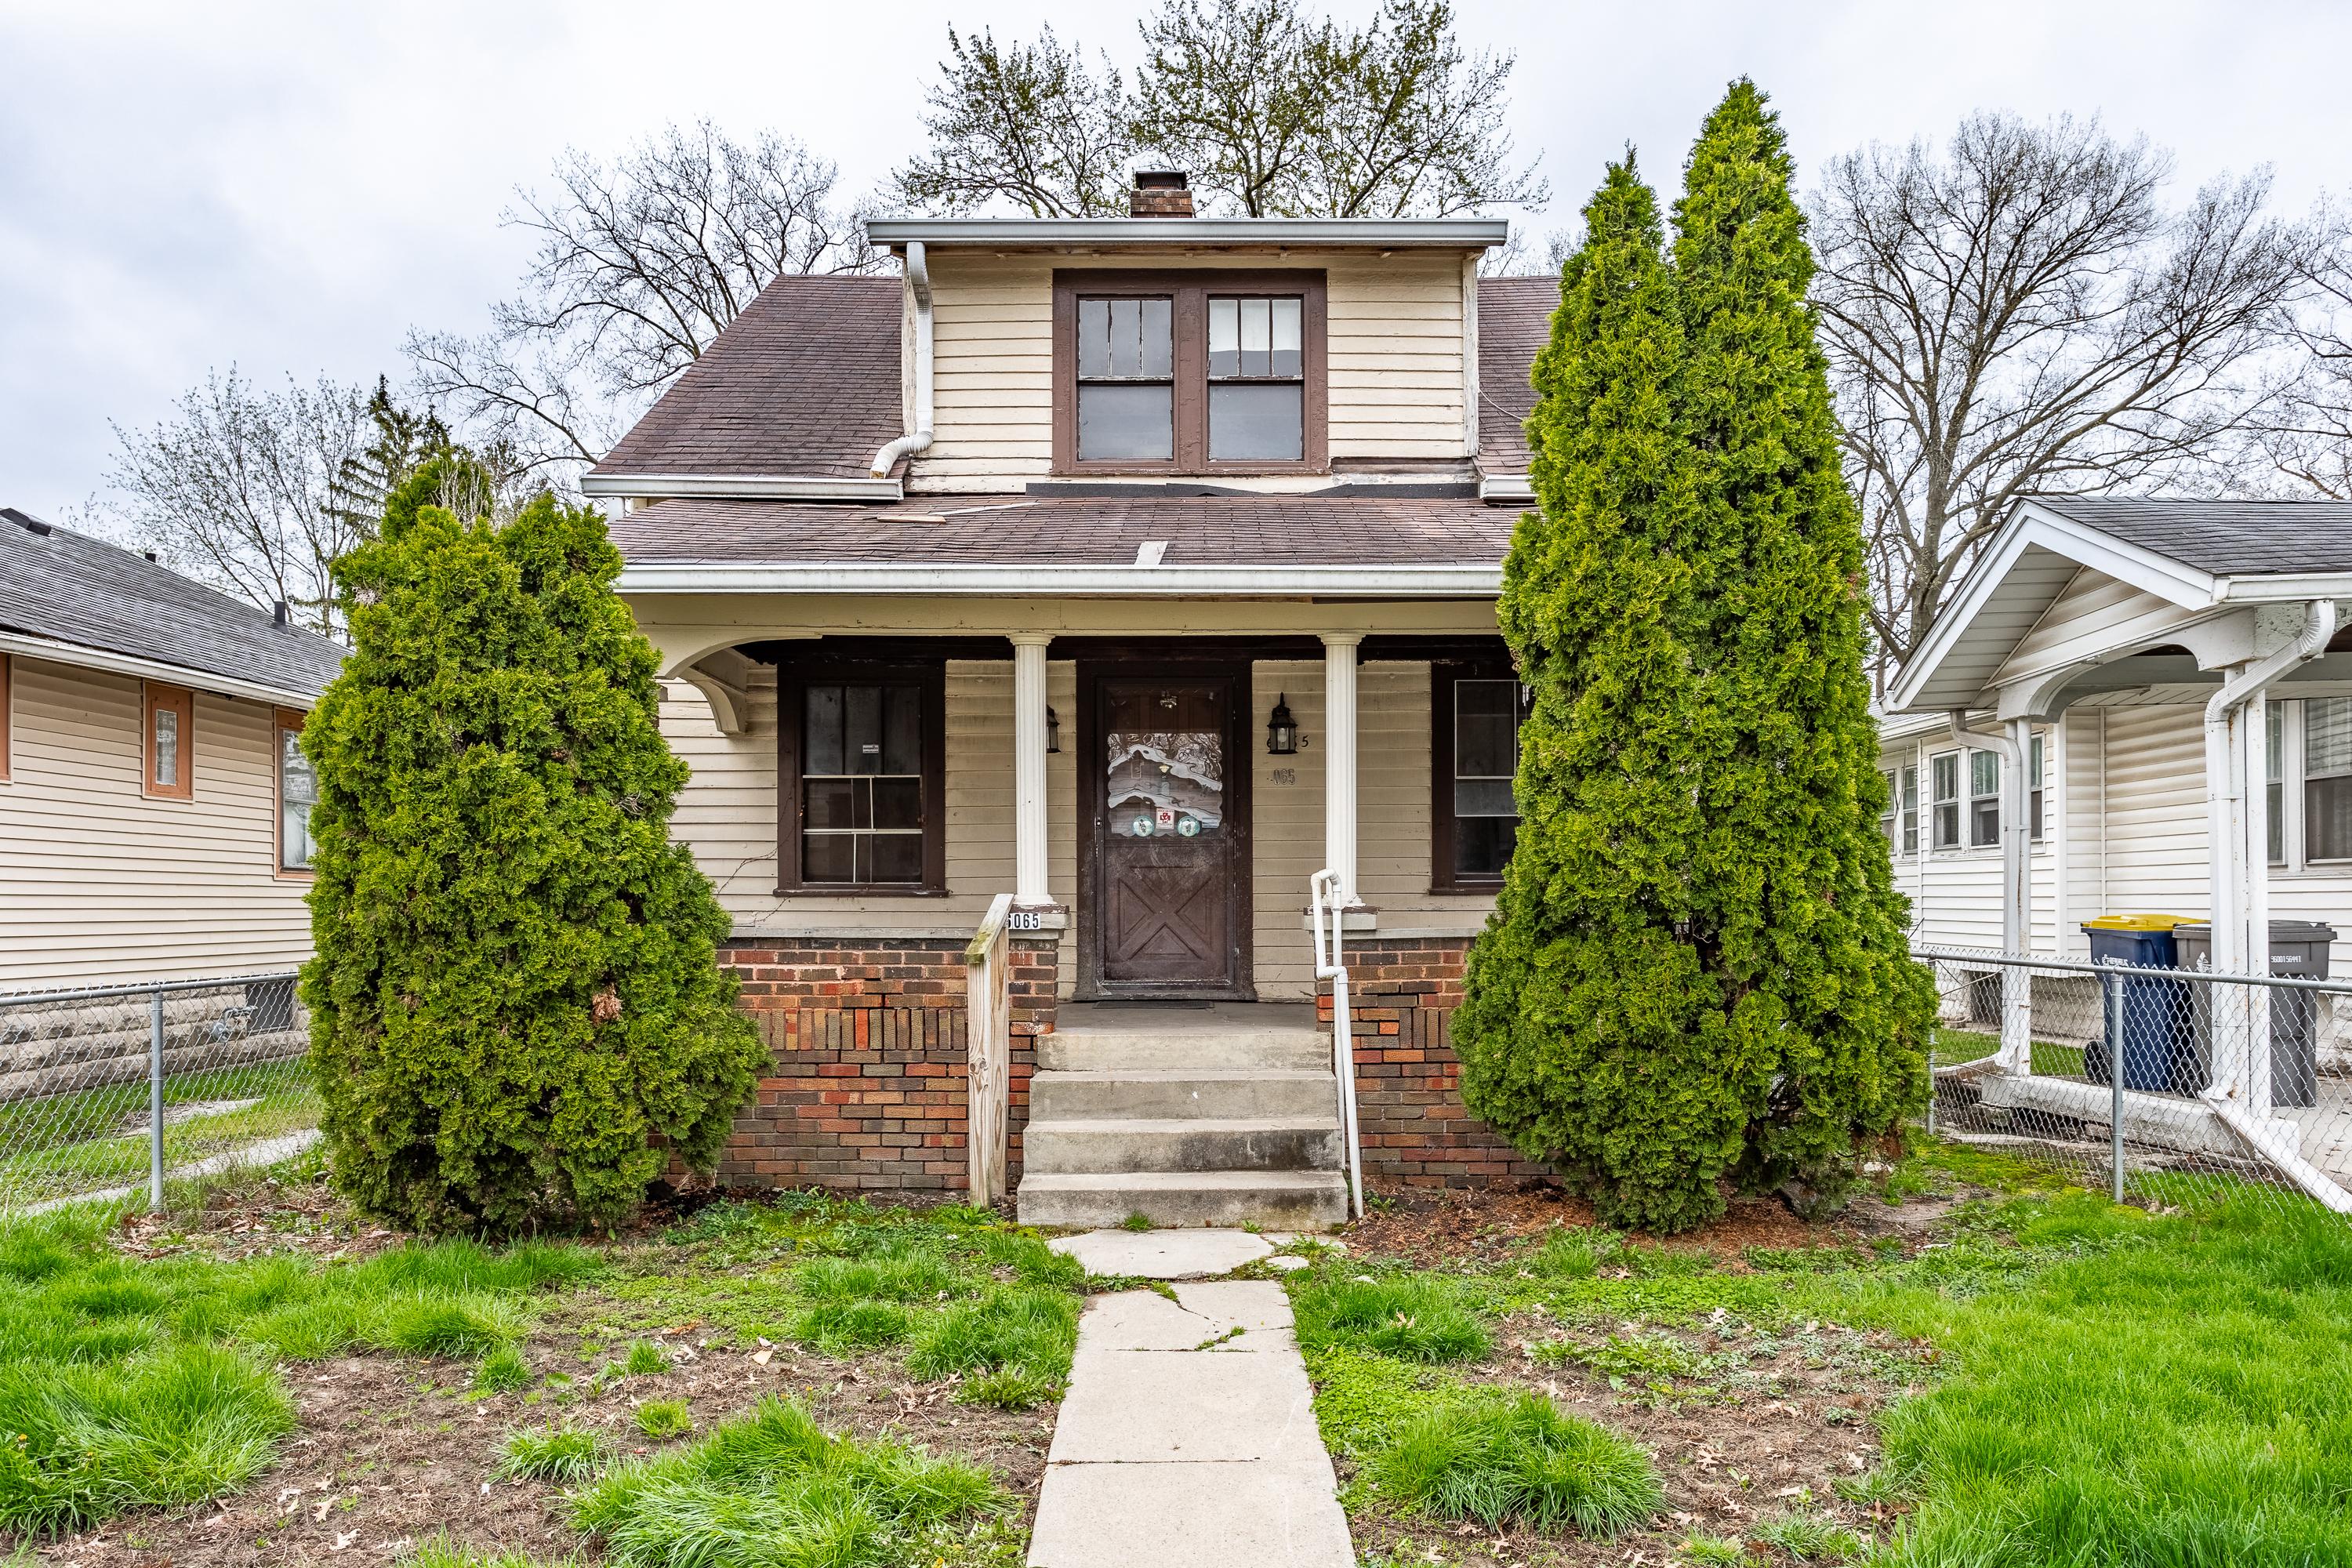 Photo one of 6065 Dewey Ave Indianapolis IN 46219 | MLS 21973322